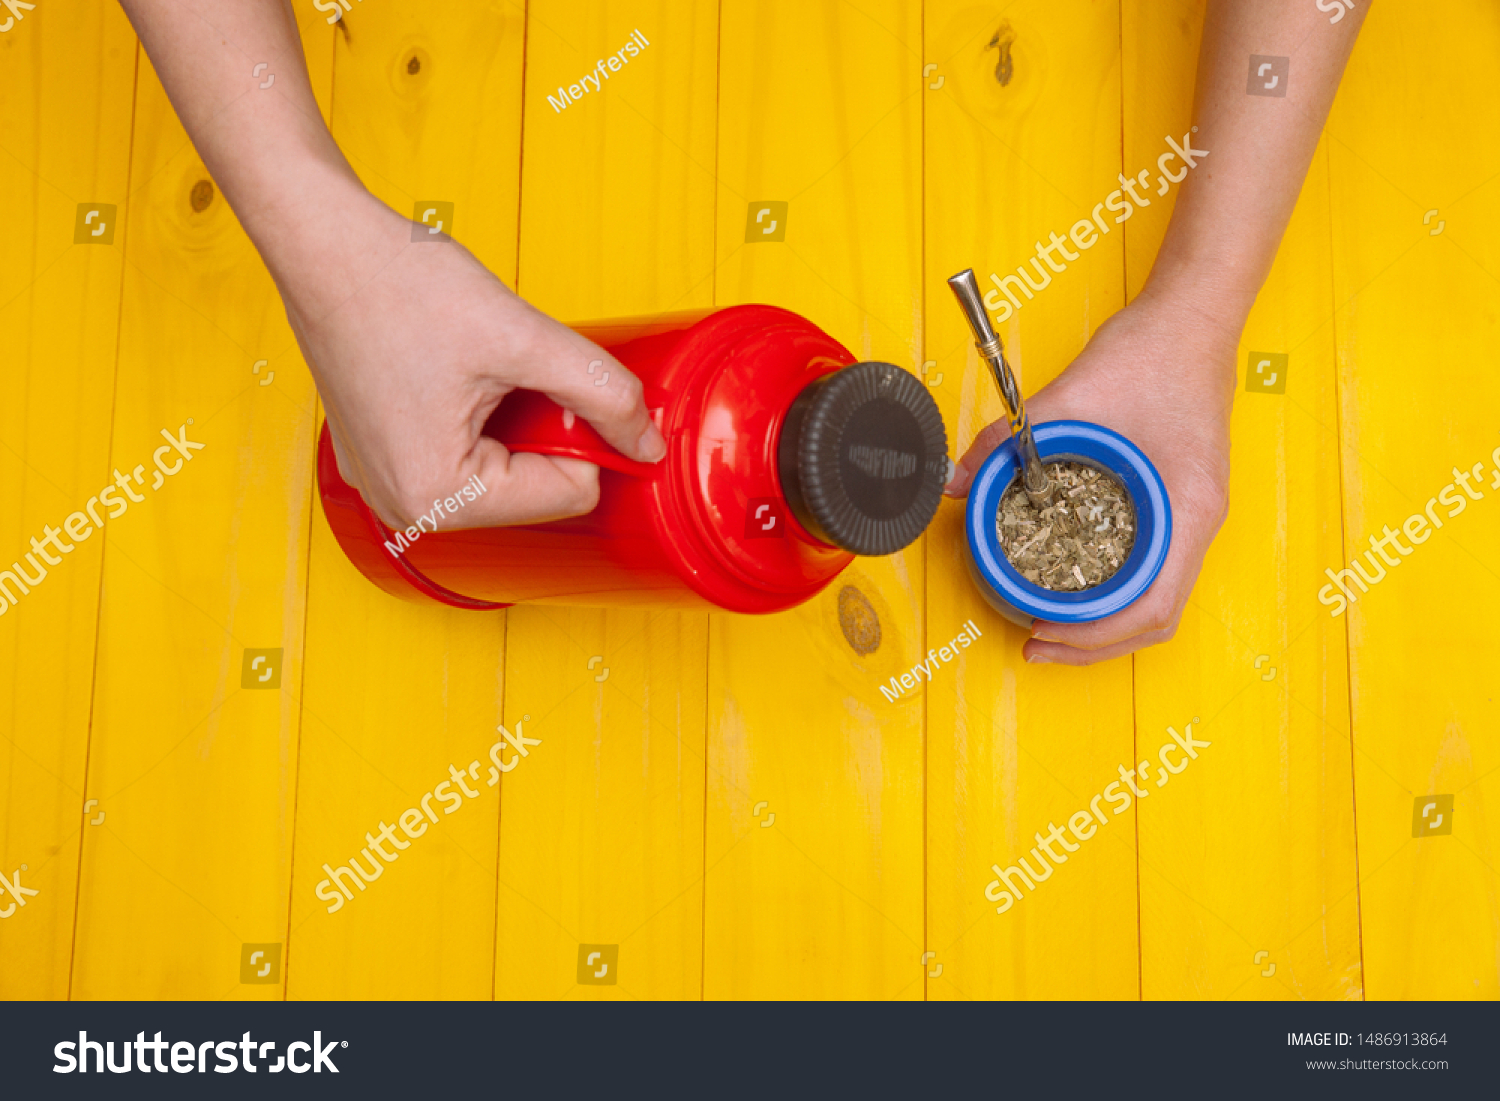 Download Blue Matte Red Thermos Yellow Wooden Food And Drink Stock Image 1486913864 Yellowimages Mockups